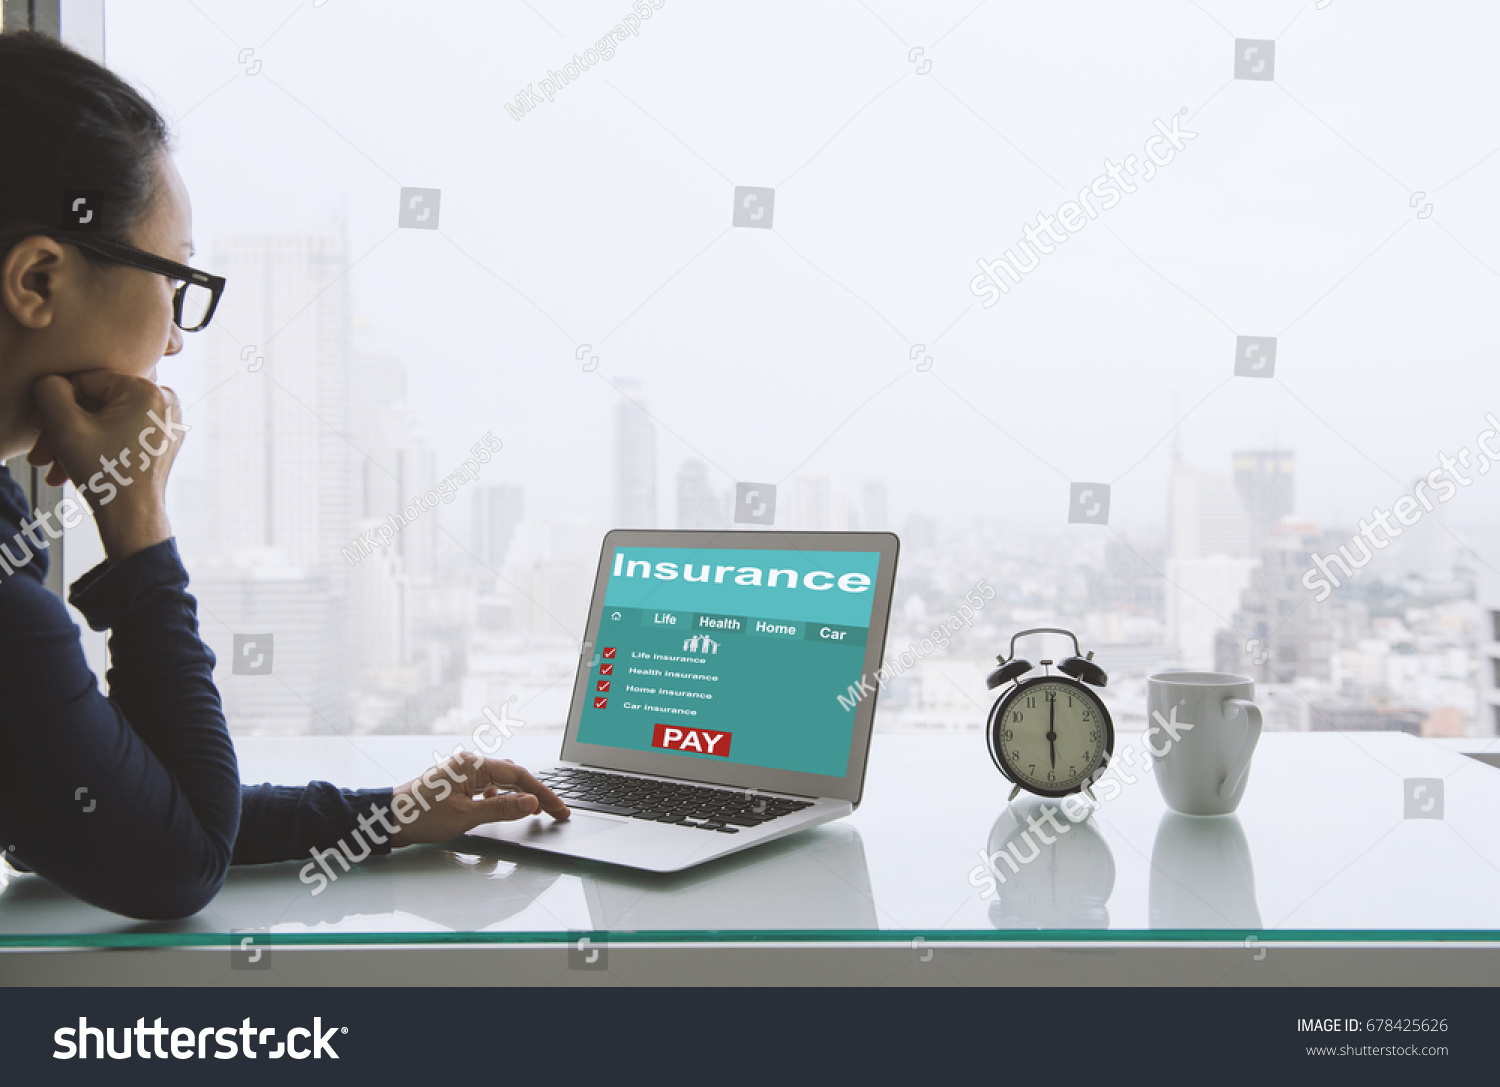 Insurance concept. Women use laptops to search for insurance online on a home office. #678425626